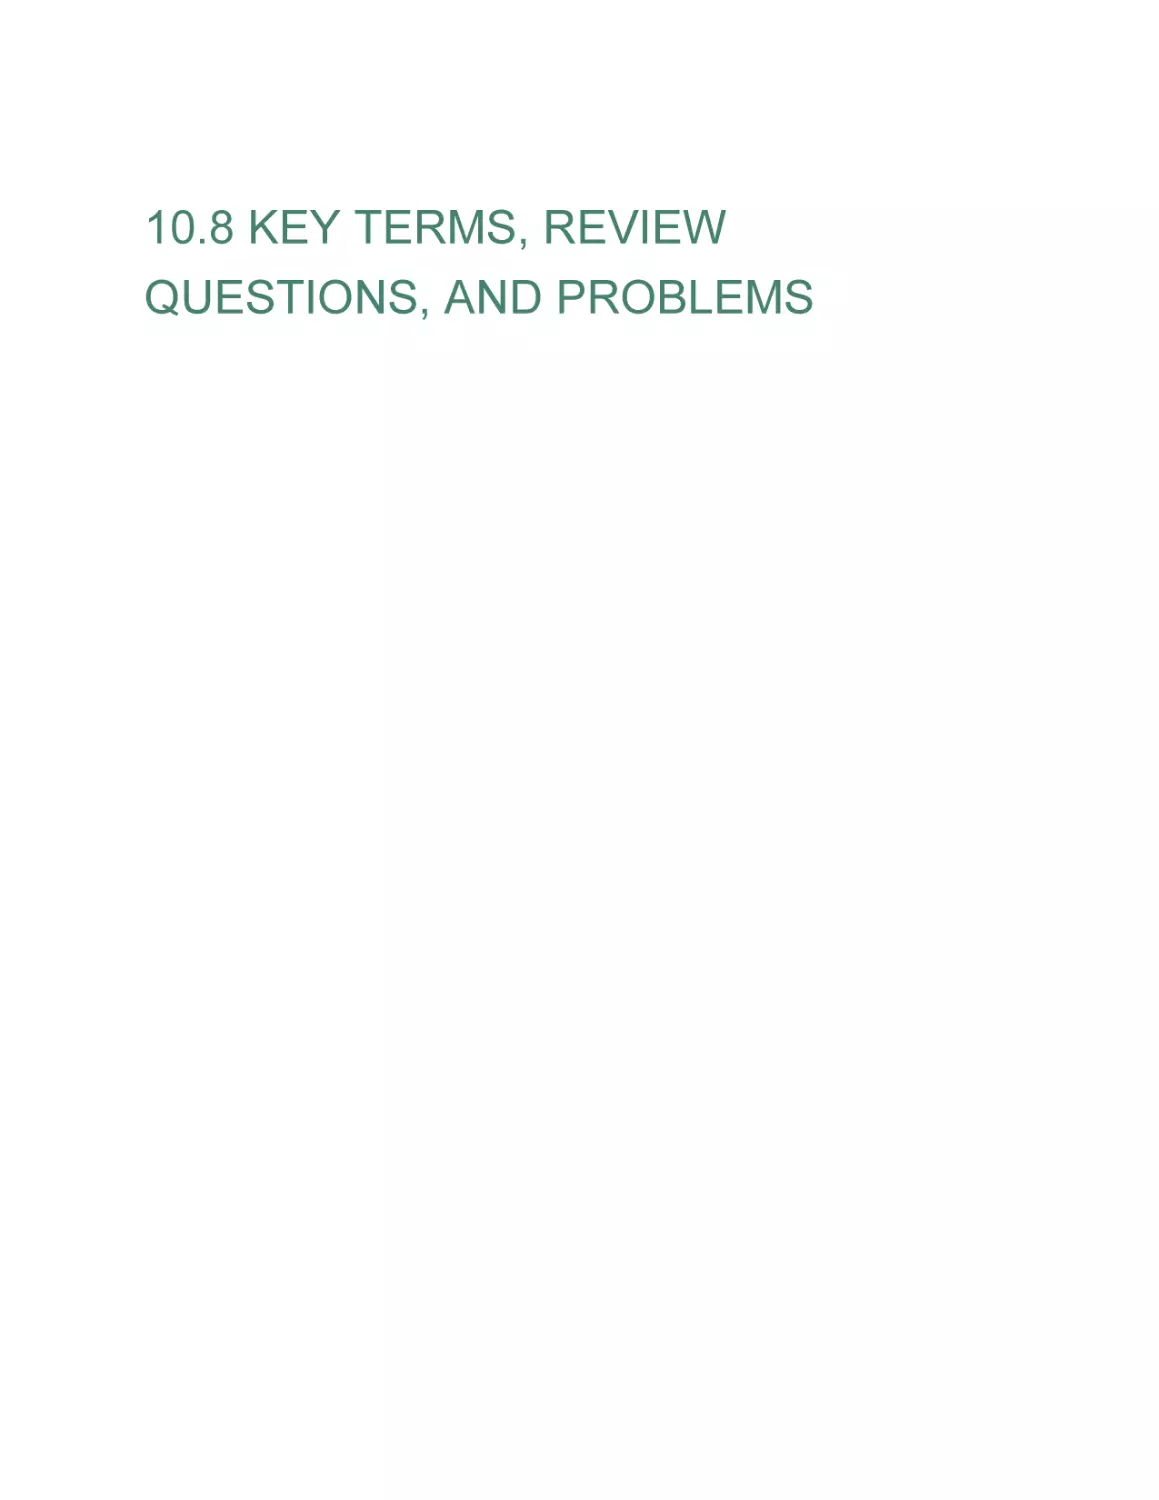 10.8 KEY TERMS, REVIEW QUESTIONS, AND PROBLEMS